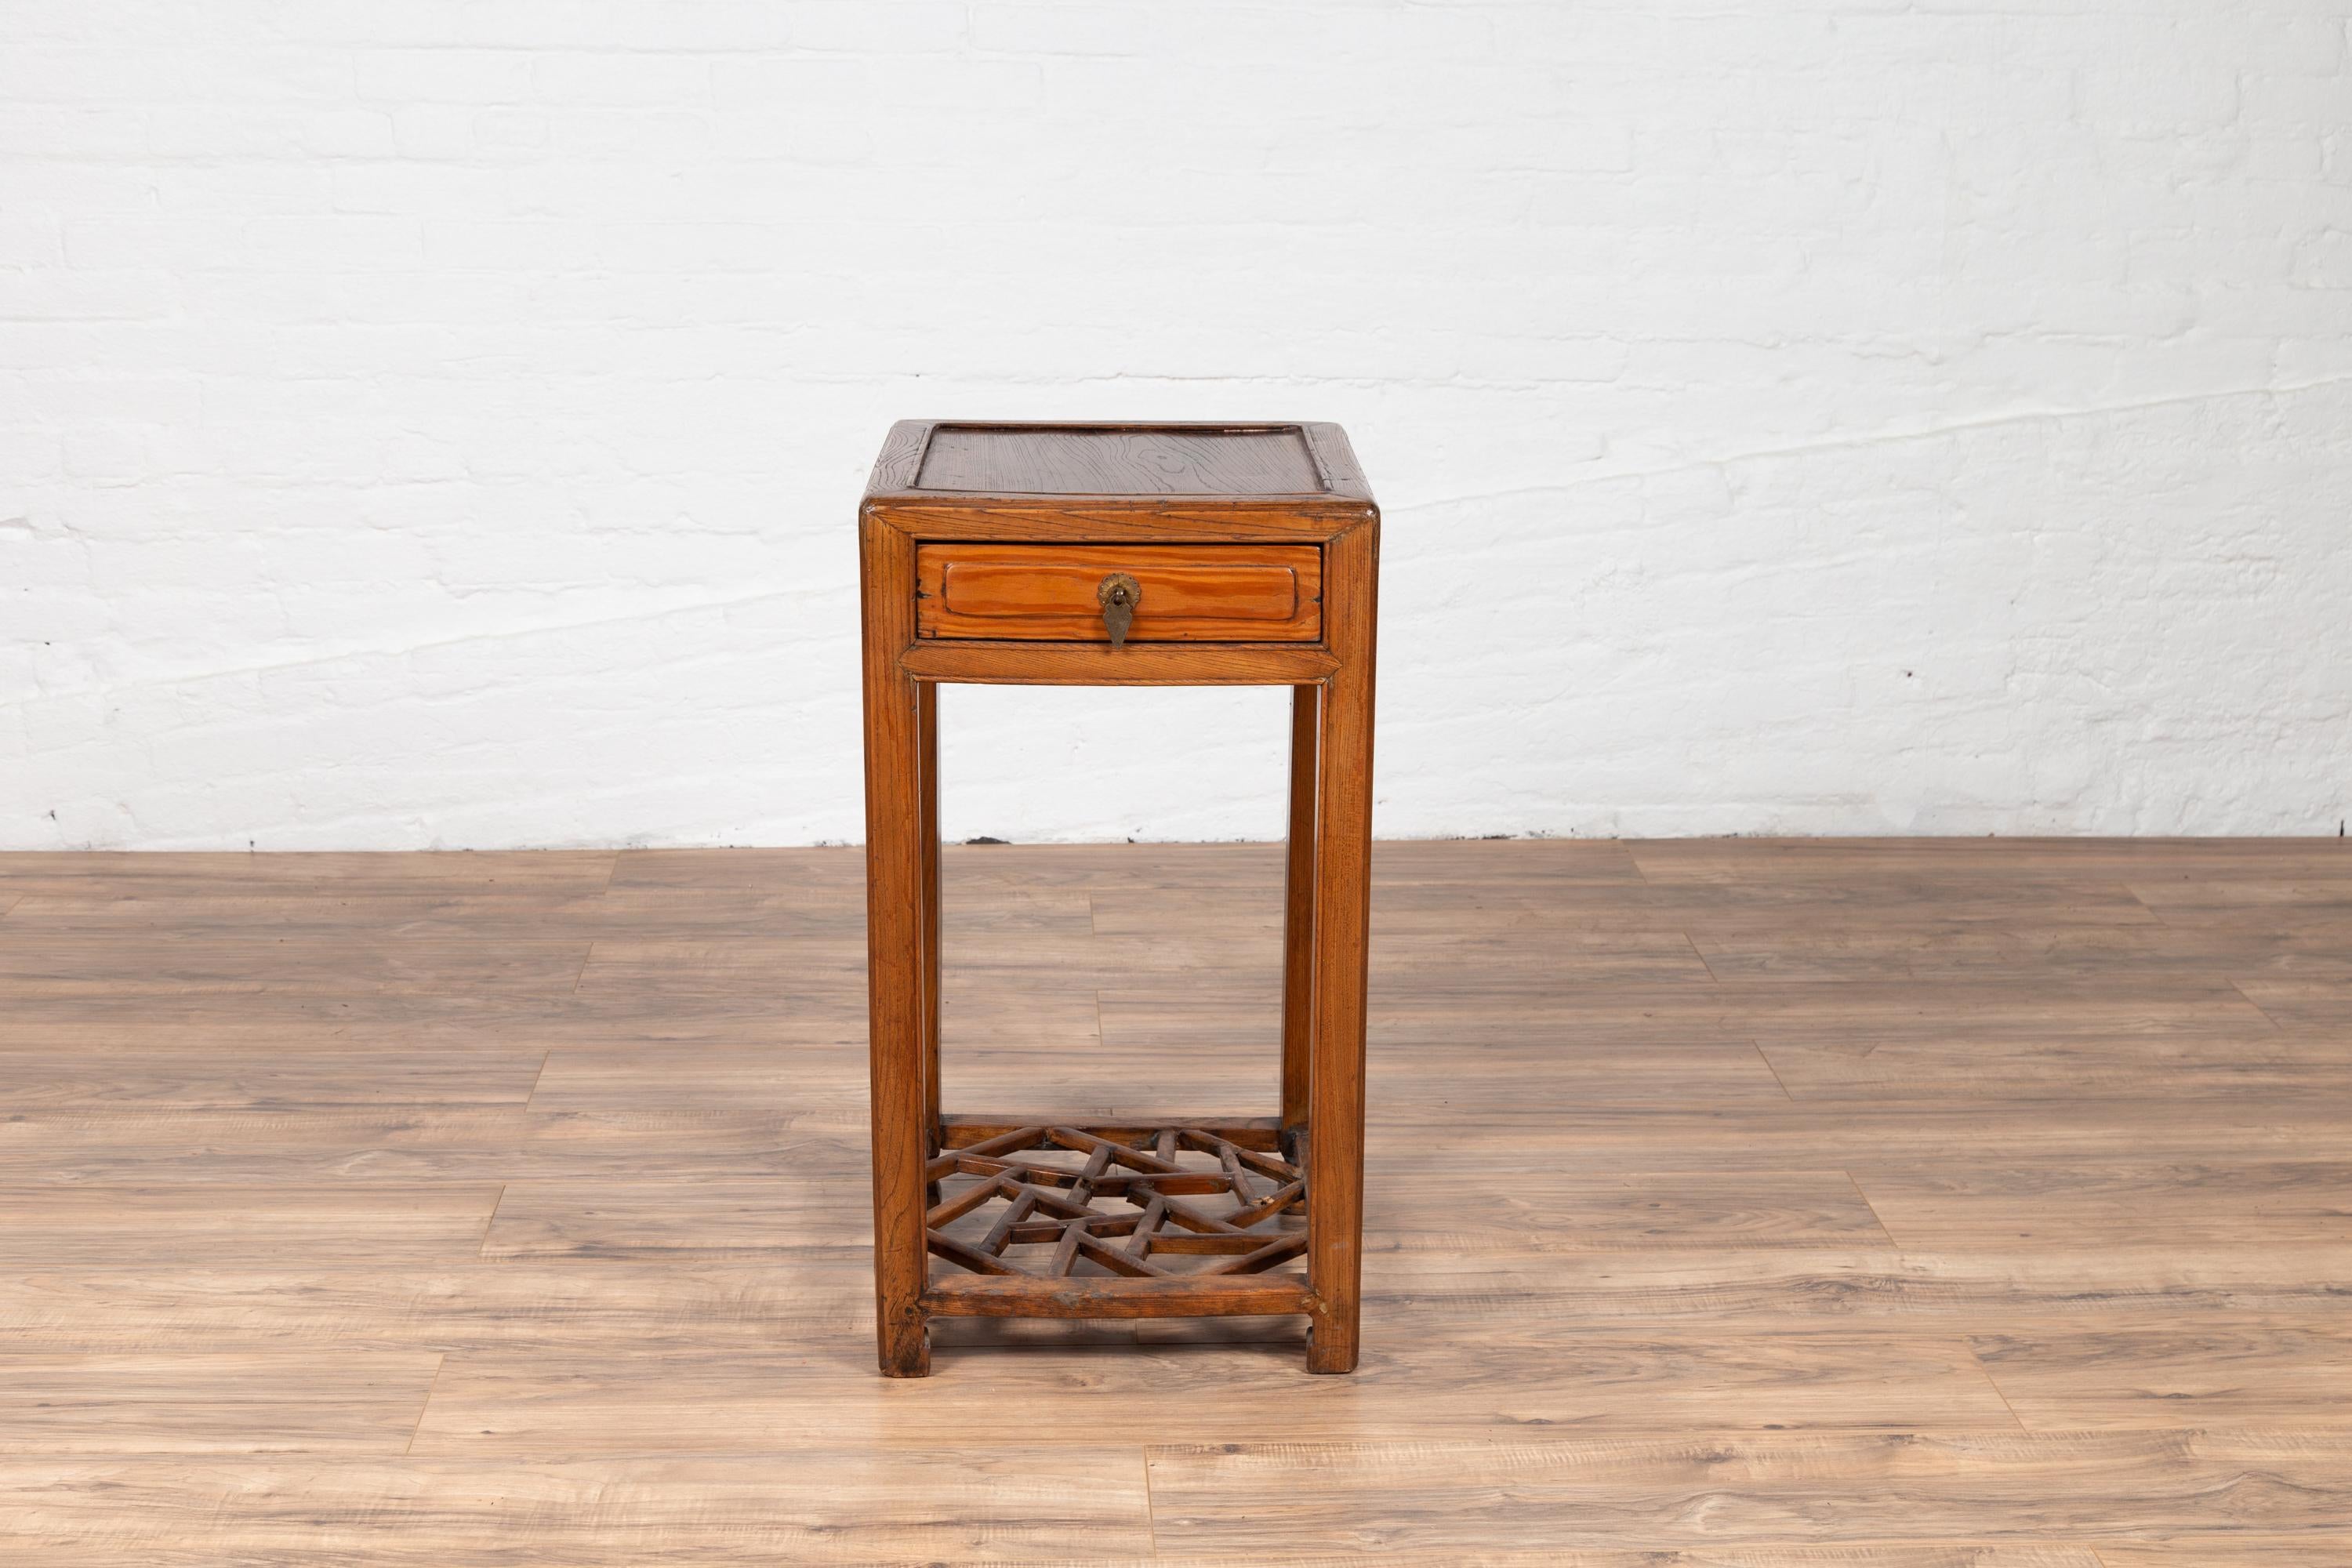 A Chinese vintage elmwood lamp table from the mid-20th century, with single drawer and cracked ice shelf. Born in China during the midcentury era, this charming side table features a square top accented with a thin molding, resting above a single